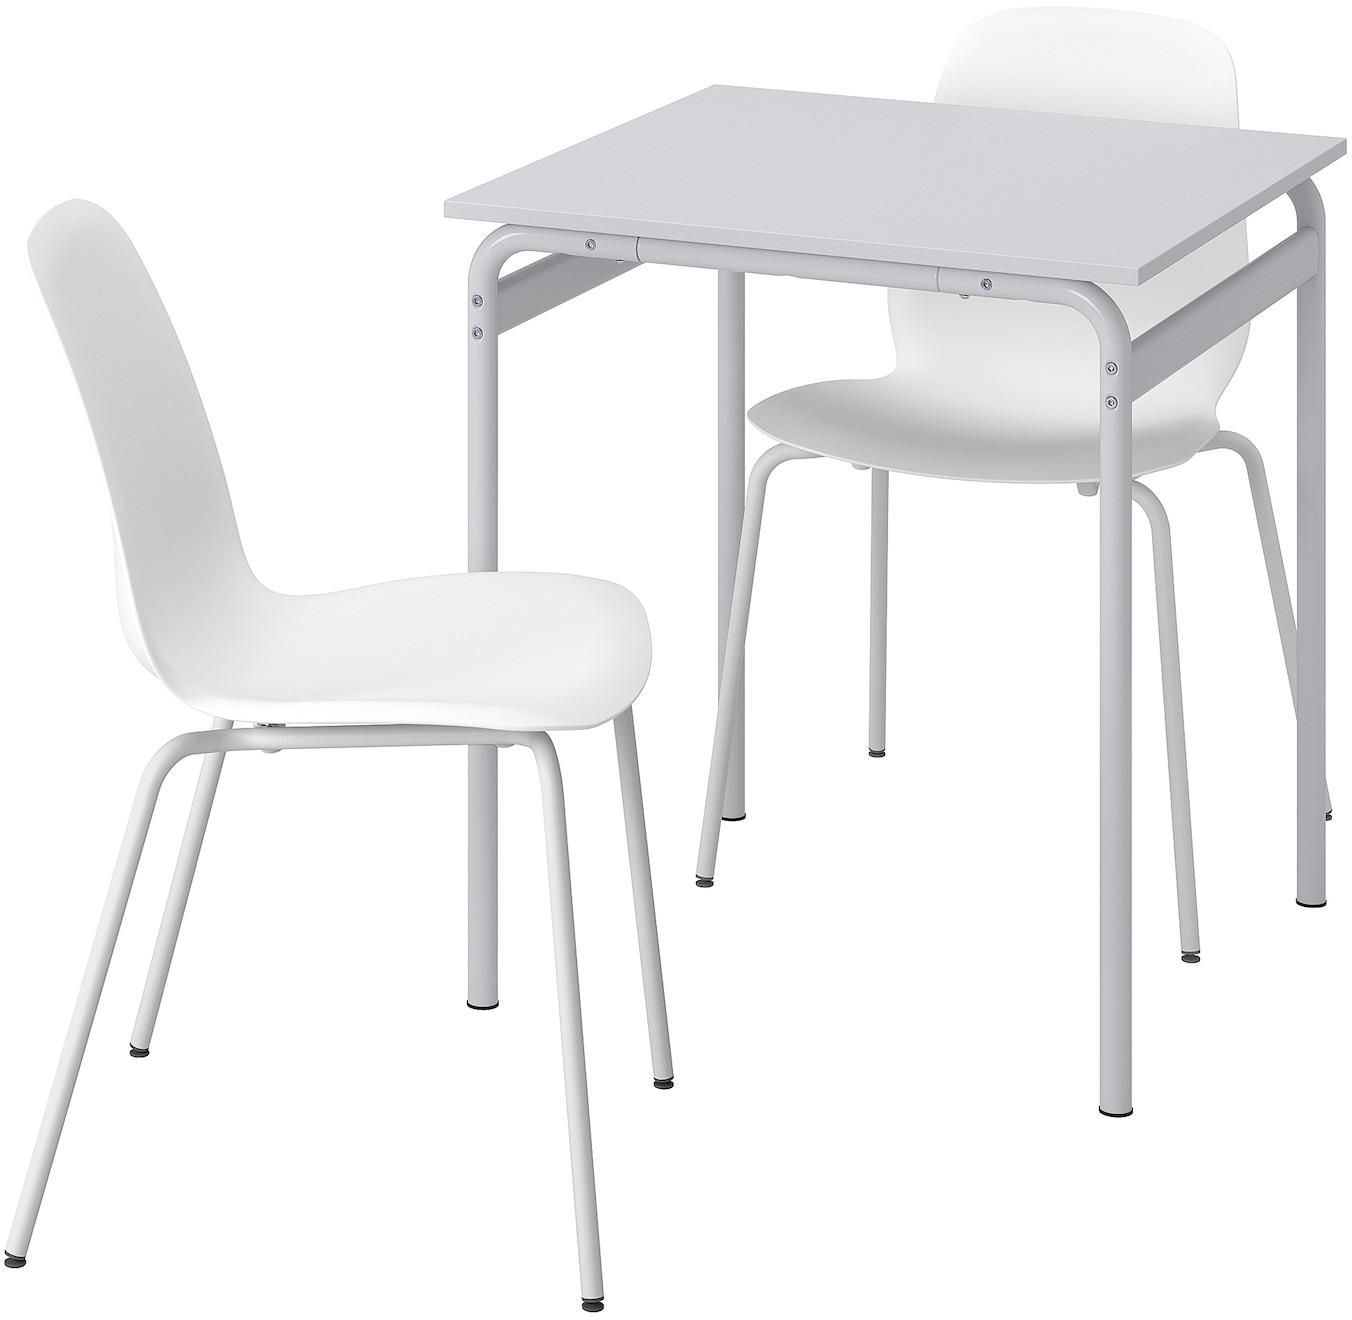 GRÅSALA / LIDÅS Table and 2 chairs - grey/white white 67 cm